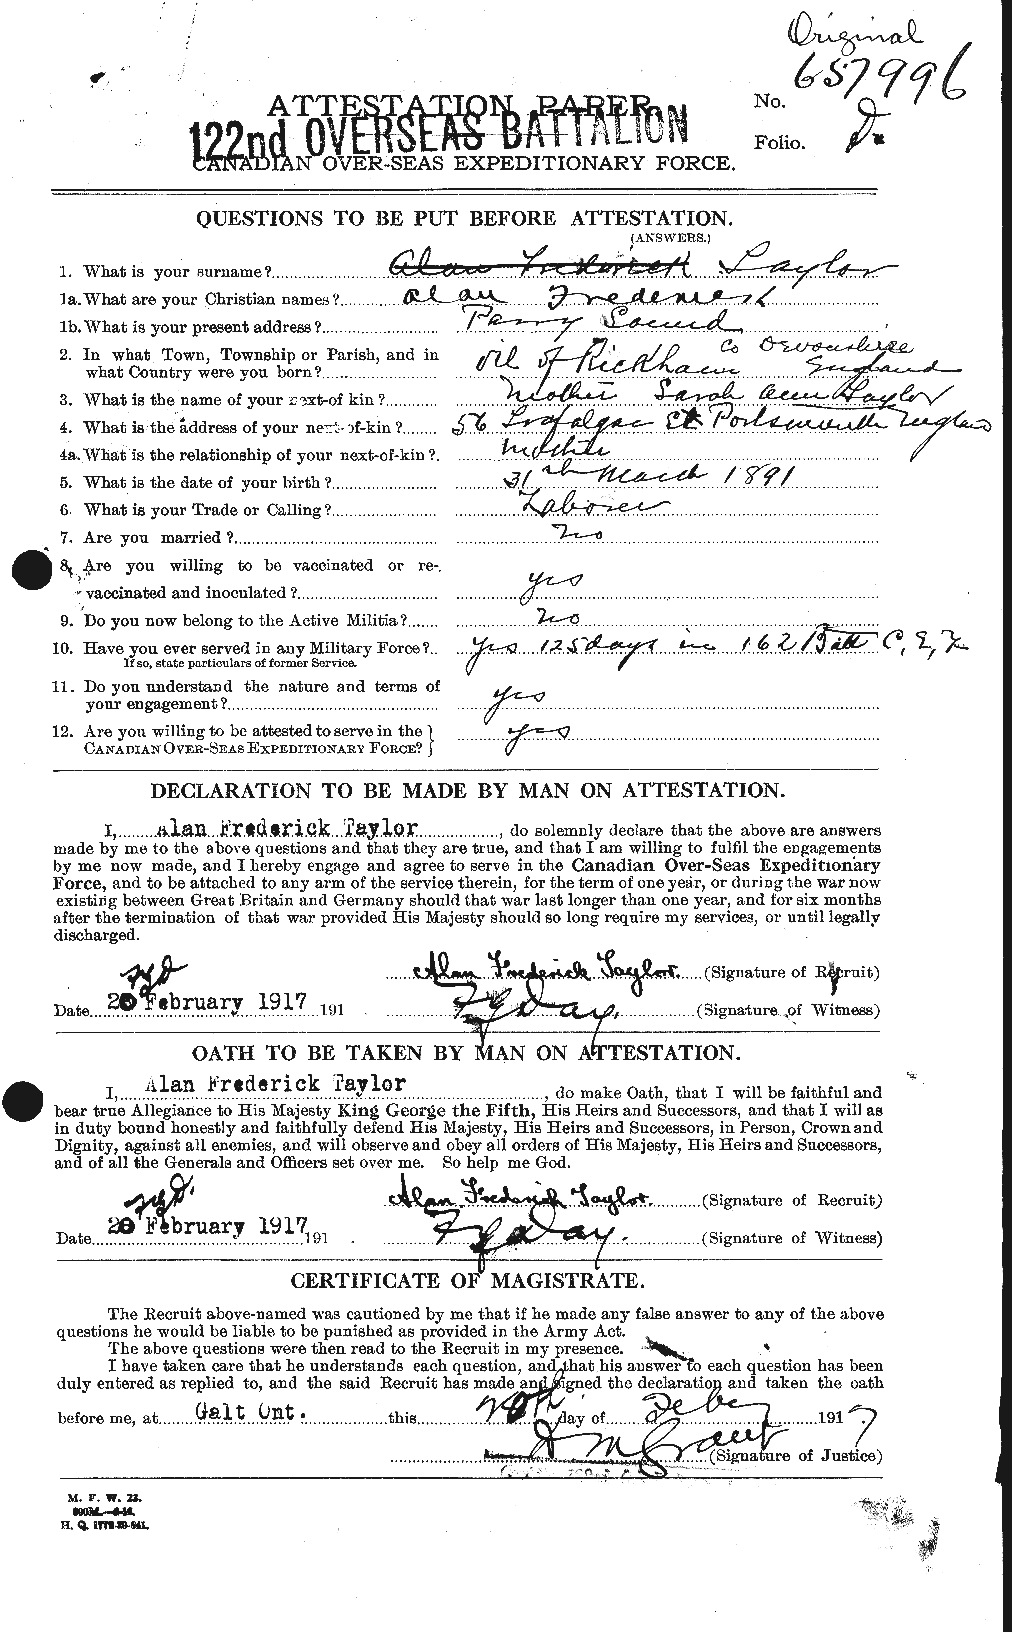 Personnel Records of the First World War - CEF 626207a